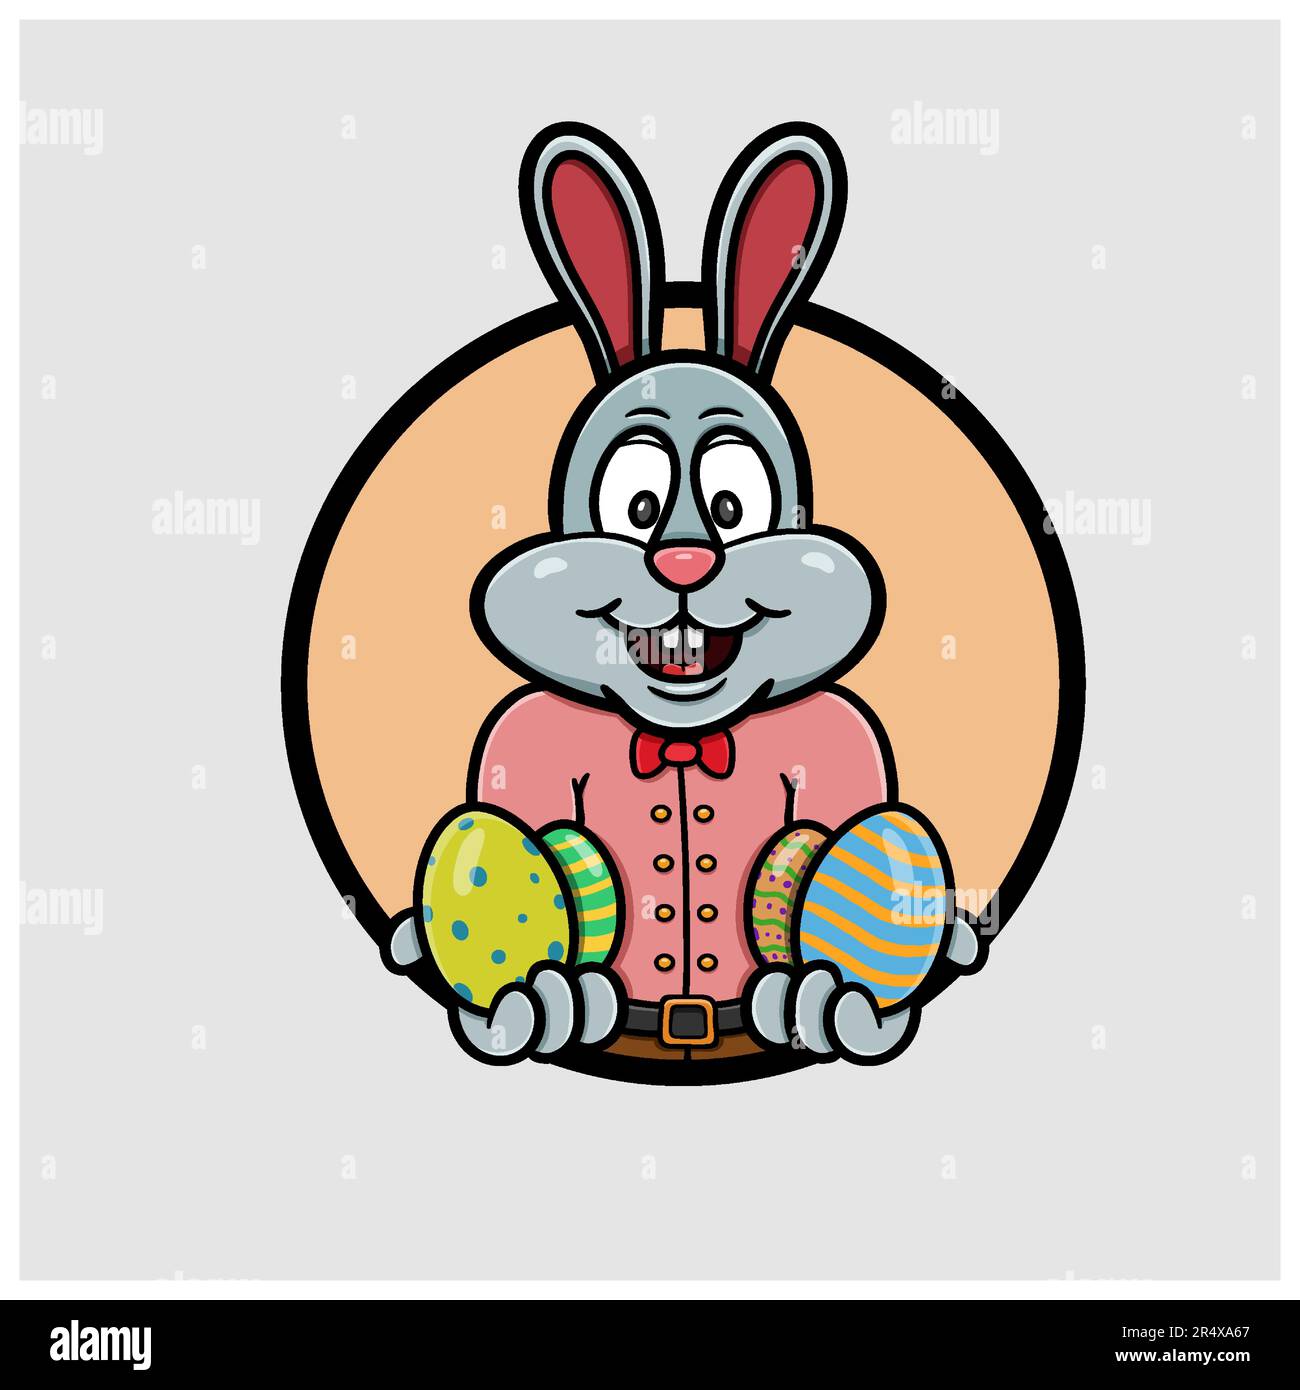 Mascot Rabbit Cartoon With Eggs Logo. Happy Easter Theme. Vector and Illustration Stock Vector